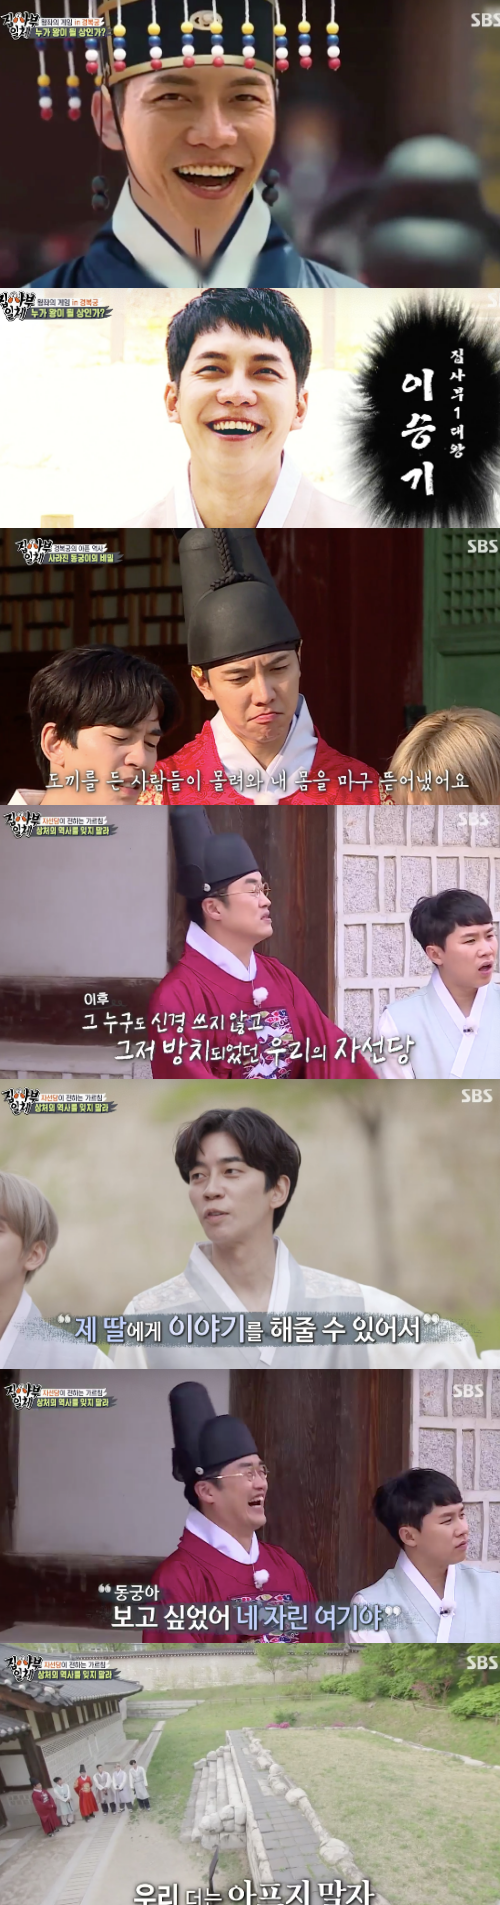 While the Palace Master was the first to scramble at All The Butlers, I had time to reconsider the history and meaning of Gyeongbuk Palace.On the 2nd, SBSs song All The Butlers was broadcast by the Gyongbokgung.Choi Tae-seong and child actor Kim Kang-hoon, who will teach Histories, appeared. The members arrived and the Master explained today as Gyeongbokgung.The members said, The building, not a person, is the first and the first in history. Gyongbokgung Master is the first and the best master.In addition, it is the first time that the Gyeongbokgung Tongdae is the first performing arts.The members looked back from the heart of the Joseon Dynasty, saying, Lets feel the joy of Gyeongbokgung. Choi Tae-seong said, There is a court culture festival in May. Im sorry, he said.Then, following the will of the Palace, he headed to the Charity Party.Kim Kang-hoon explained, It is the residence of Seja and Sejabin, and it is in the east because the tax is the rising sun. The charity is a place to raise a benevolent character.I like this place, a child who loves the palace, he said, and he enjoyed catching the game.I kept looking around the palace.Choi Tae-seong said that it was a space where the Eumi incident took place, and that the members said that they had a heartbreaking history. The members said that they were heartbroken. Kim Kang-hoon said, I learned it as a textbook, it would have been too scary.Choi Tae-seong explained that Guncheonggung is the space where the modern civilization is the fastest accepted, and the first place in Korea where the light is lit. Lee Seung-gi said, Gyeongbokgung is also a place where people live.At this time, Goodbye My Princess has disappeared Kim Kang Heon and the atmosphere changed 180 degrees.Then, I found out that Goodbye My Princess was a diary, and all of them were the palace of the east, Goodbye My Princess was not a man, it was a palace.I learned about the shocking past that auctioned Gyoungbokgung, and I was heartbroken by all the sick histories more than 100 years ago.Later, through the Goodbye My Princess diary, I headed to Geunjeongjeon.However, it was not restored, but originally found that the charity was in the backyard of the palace, but only the place remained.Choi Tae-seong said, The royal philanthropy party where Cesar and Cesar were located, in fact, it is normal on this base.The pavilion of Gyeongbokgung went into auction, and the sad Histories, which had become a private museum of Japanese people, were also reported.In addition, the Charity Party, which was a wooden building at the time, was destroyed by a fire due to the earthquake in Kanto.In particular, it was reported that Professor Kim Jung-dong devoted his life to the return of the charity party.He made efforts to rebuild the bitter histories without forgetting, and told the back story that he was returned to Gyongbokgung in 1996.In the story of the backyard of the palace, the members said that they had restored the story by regaining the history that was almost erased, saying, If you did not know these histories, you would pass by.Choi Tae-seong said, It is a lesson of the Gyeongbokgung Master, saying, It is to find one and restore lost stories and histories, and to convey them to later generations.Shin Sung-rok said, I am glad that I can tell this to my daughter, I did not know it at all. Yang said, The charity is breathing again like a new life growing in a stone gap.Lee Seung-gi and Cha Eun-woo also expressed their extraordinary appreciation for the Histories, which they kept again, saying, Lets not hurt anymore, lets keep it from now on.Capture All The Butlers Broadcast Screen